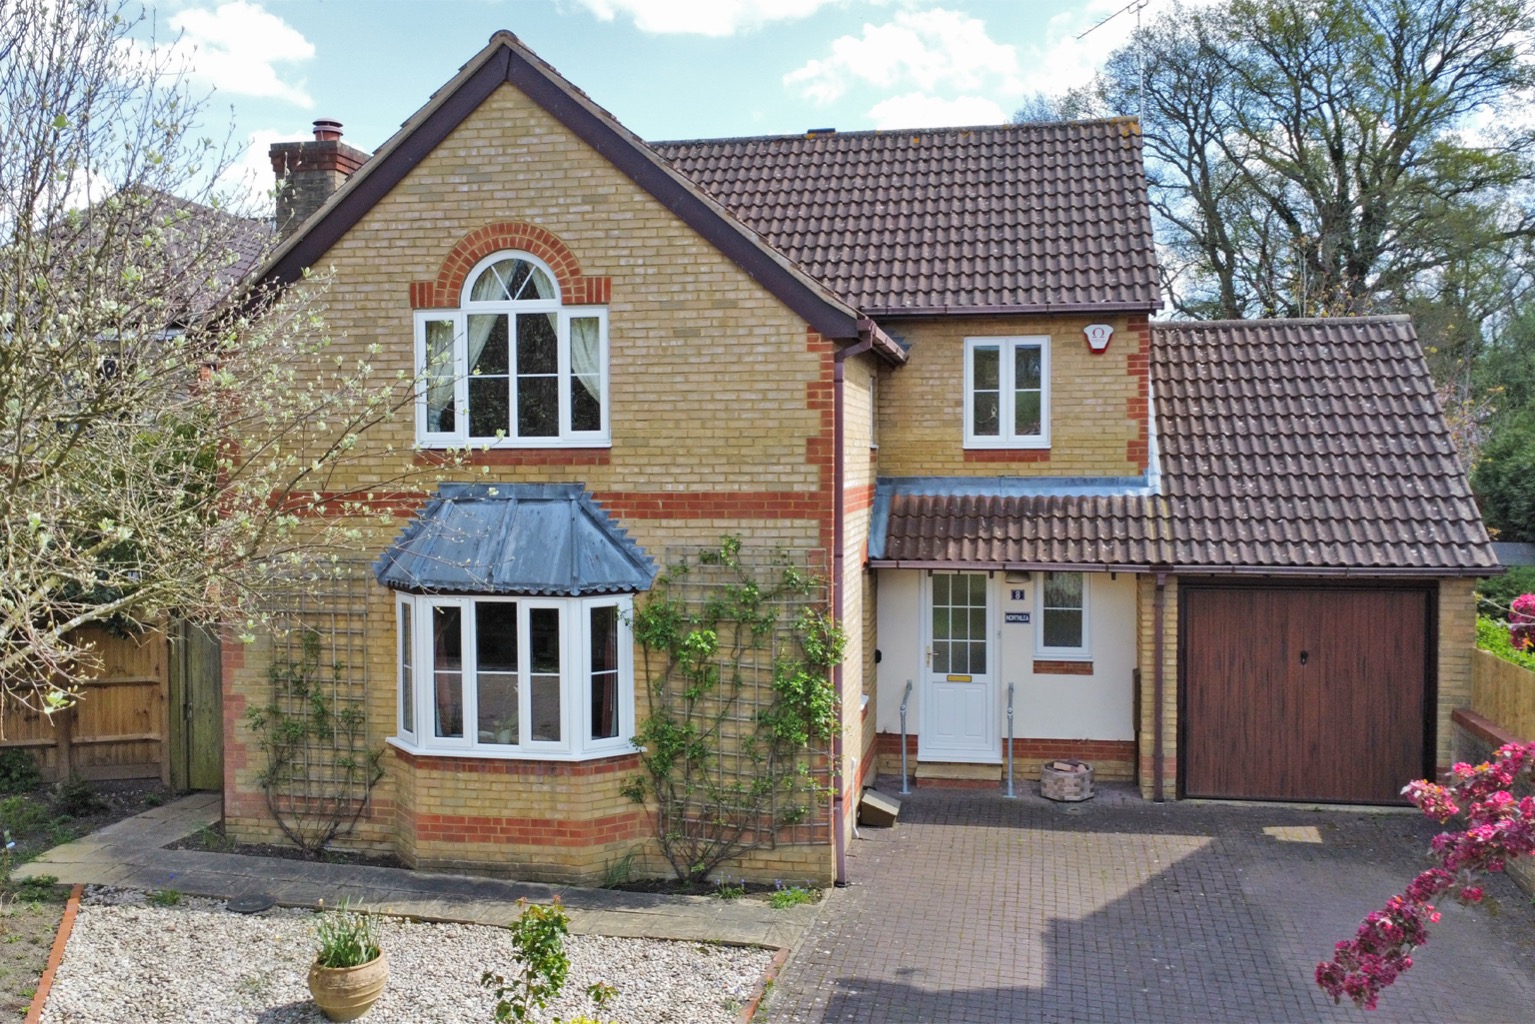 4 Bedroom detached home in Foxglove Close with an open house on Saturday 30th April